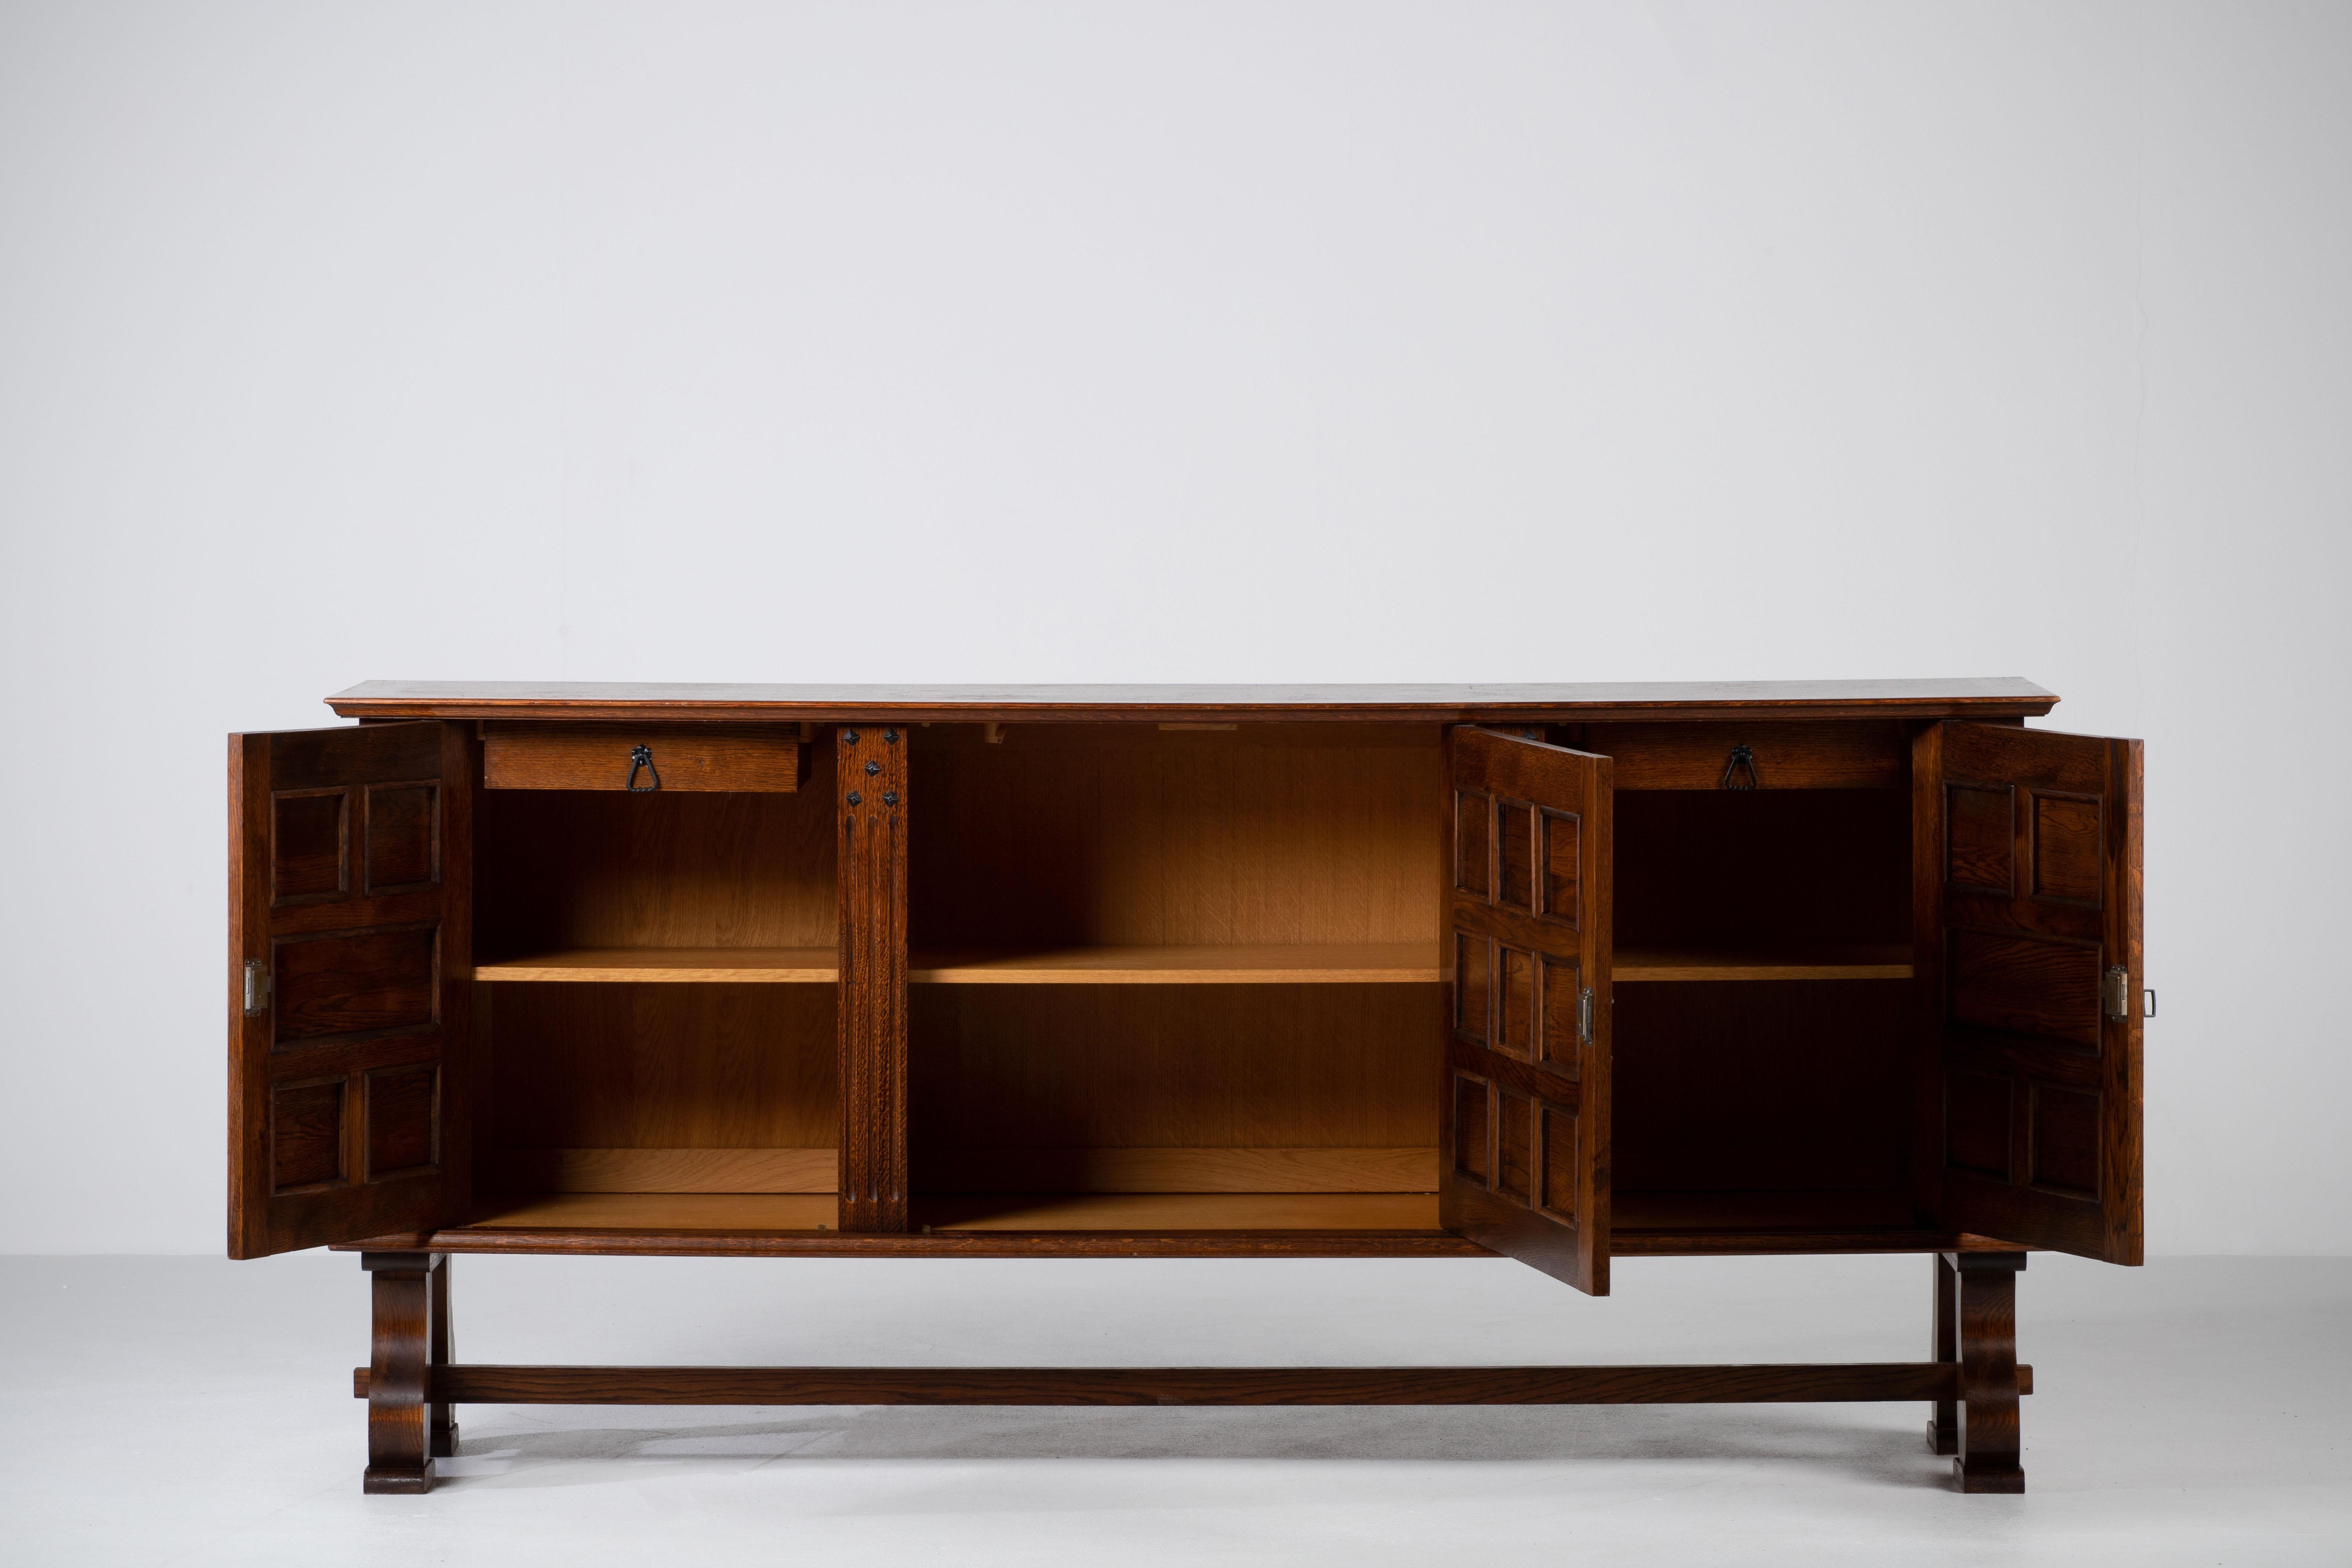 French Alpine Chalet Chic Sideboard, France, 1960